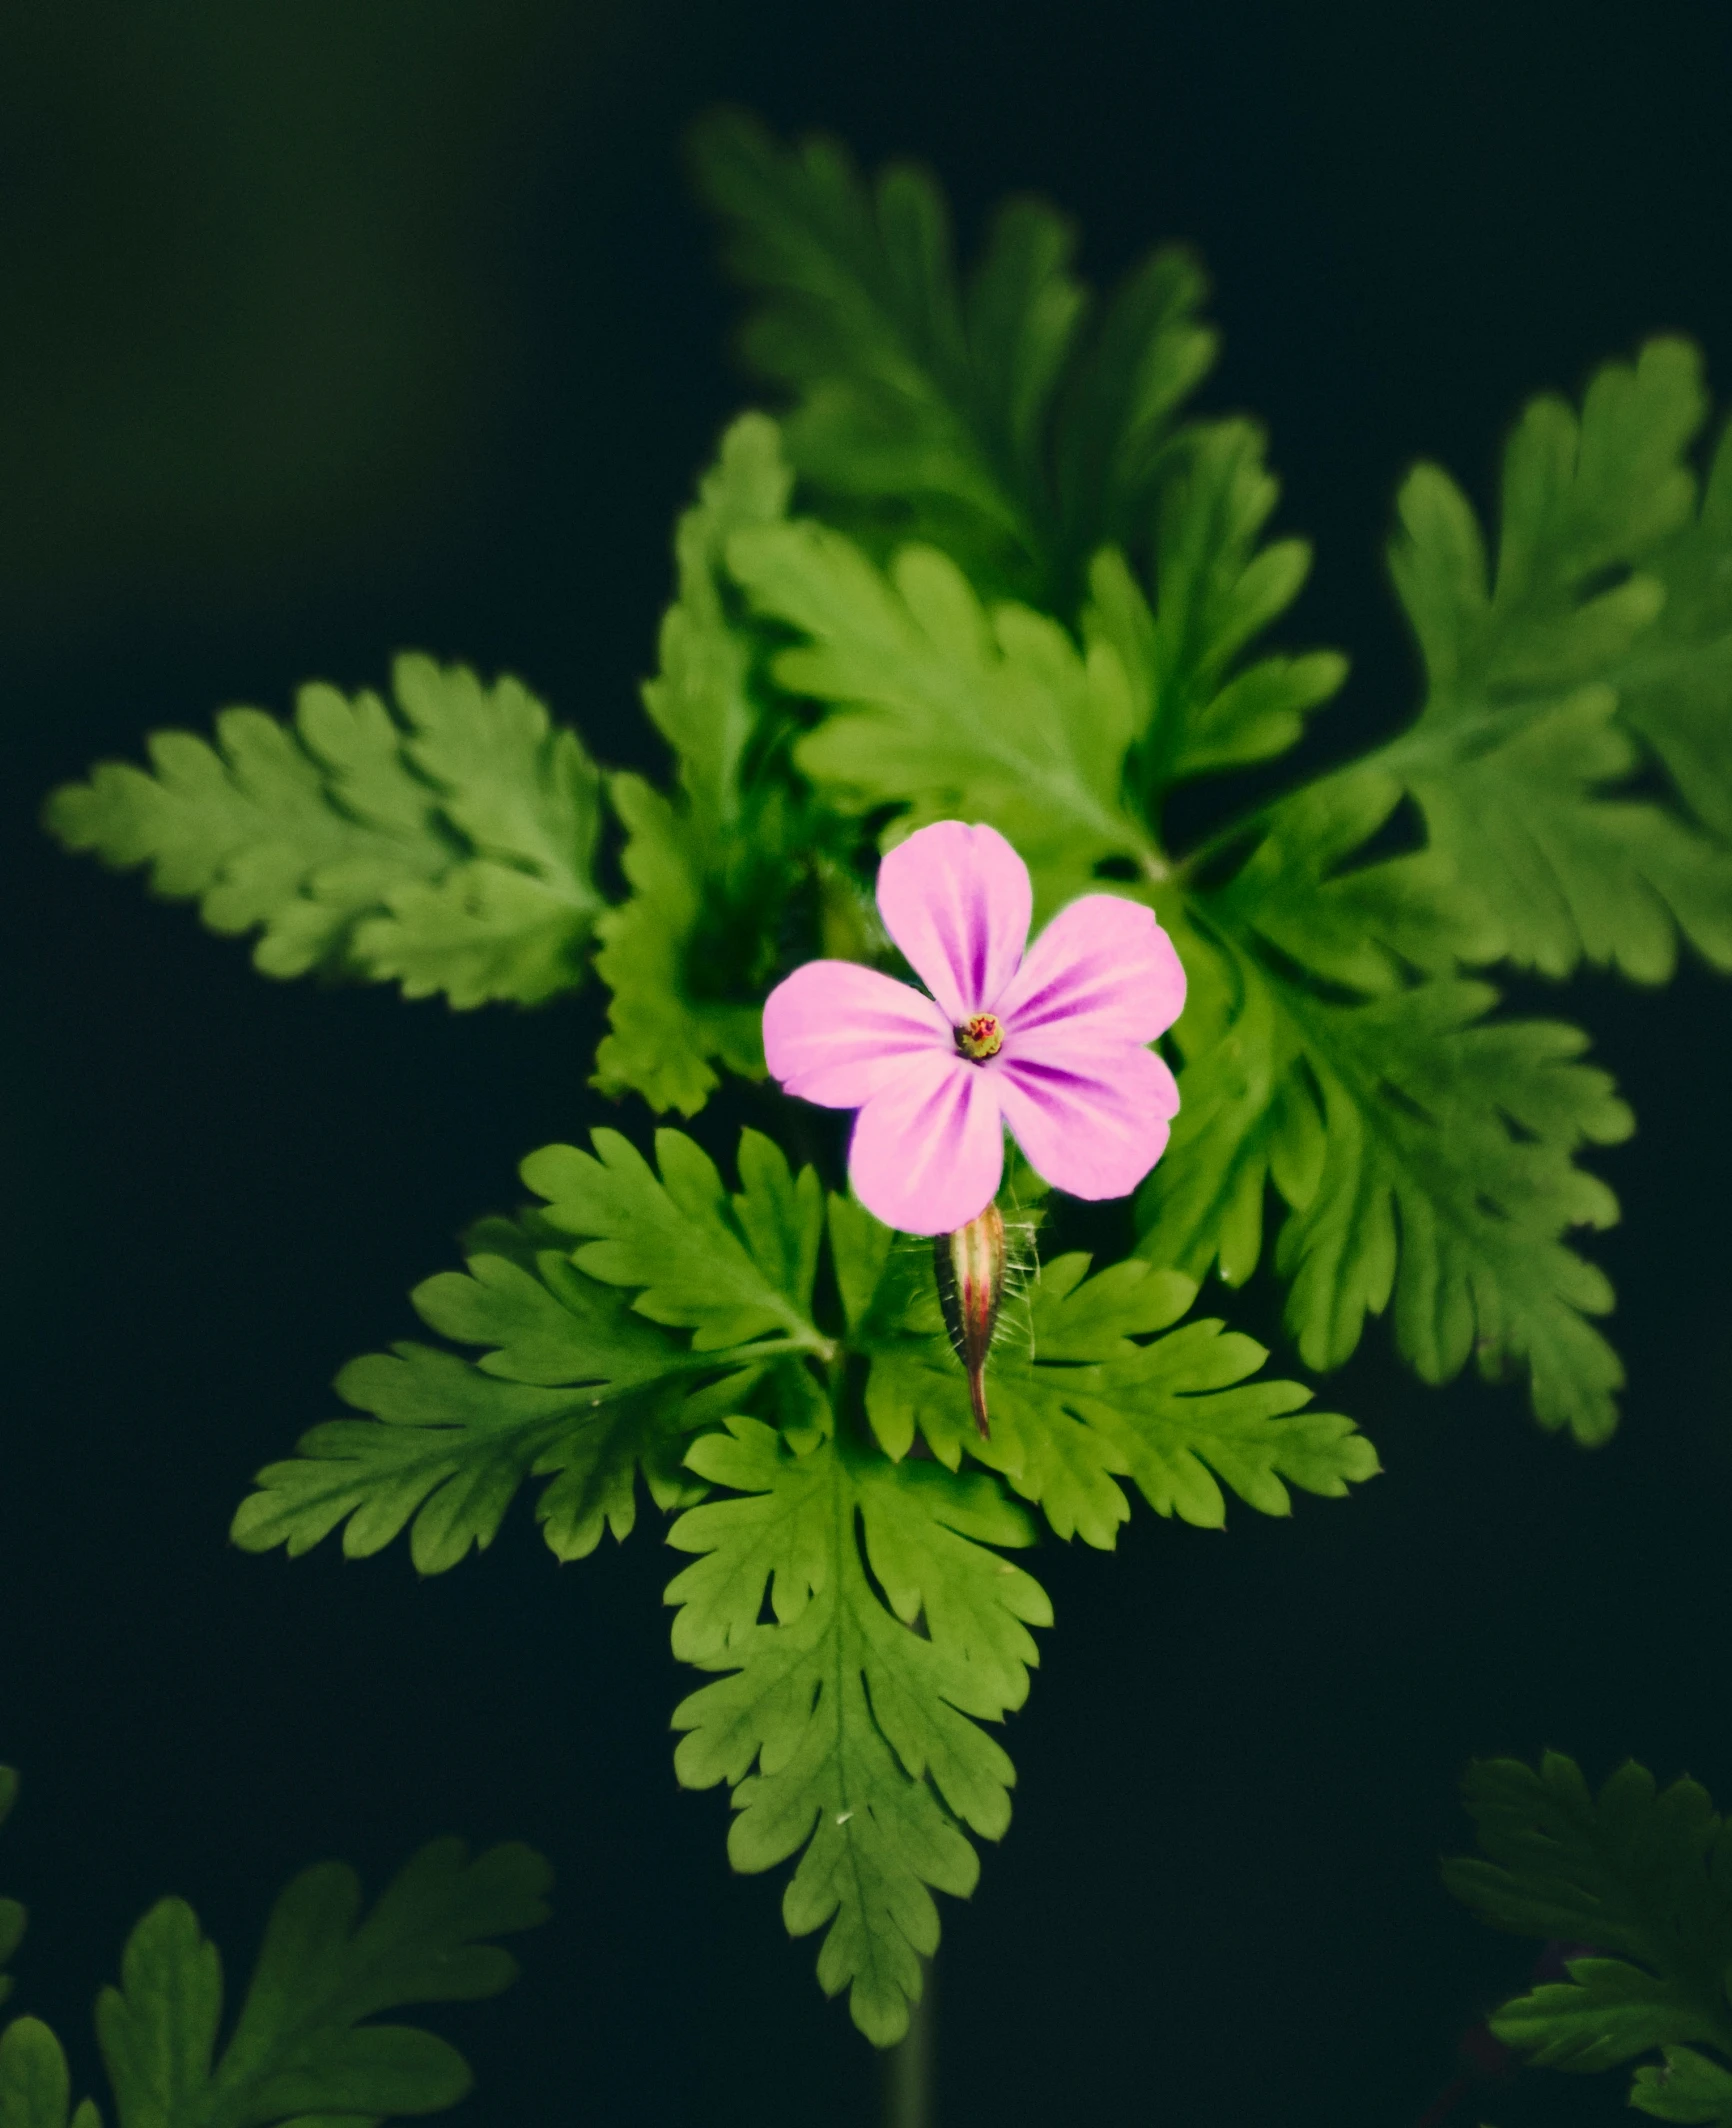 small pink flowers are growing on green leaves